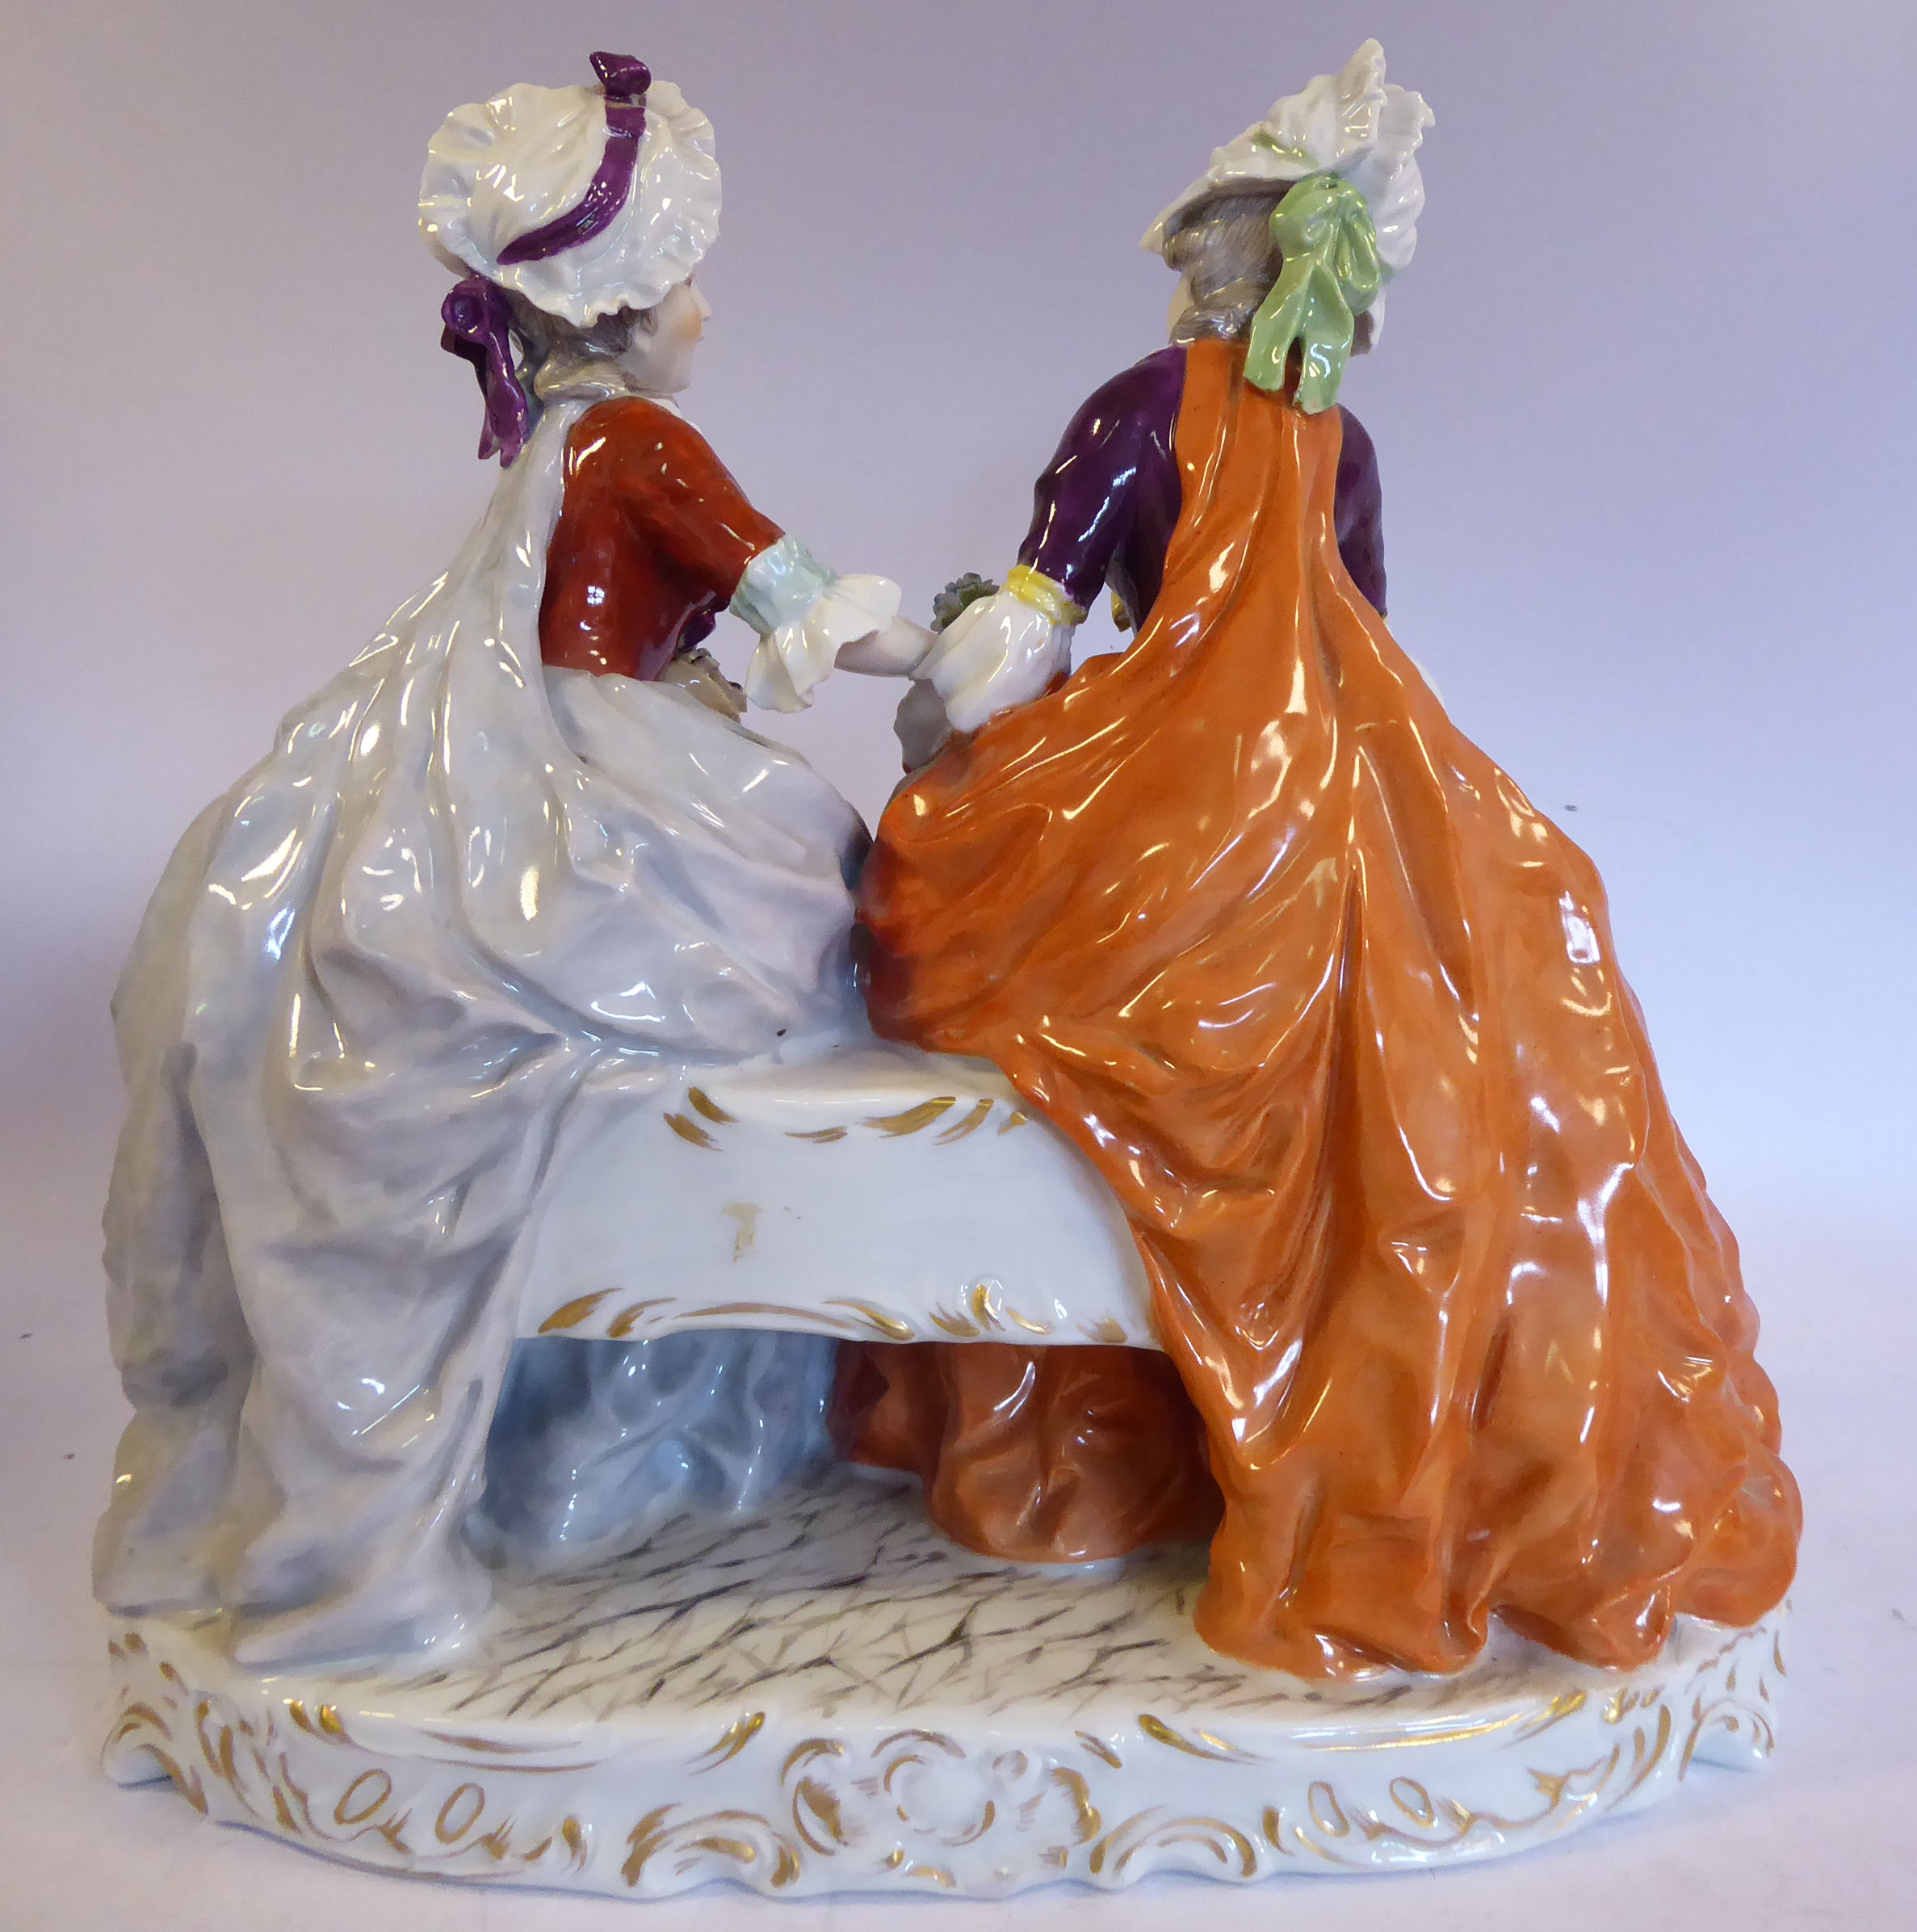 A 20thC Naples porcelain group, two seated young women wearing bonnets and floral skirts, - Image 7 of 10